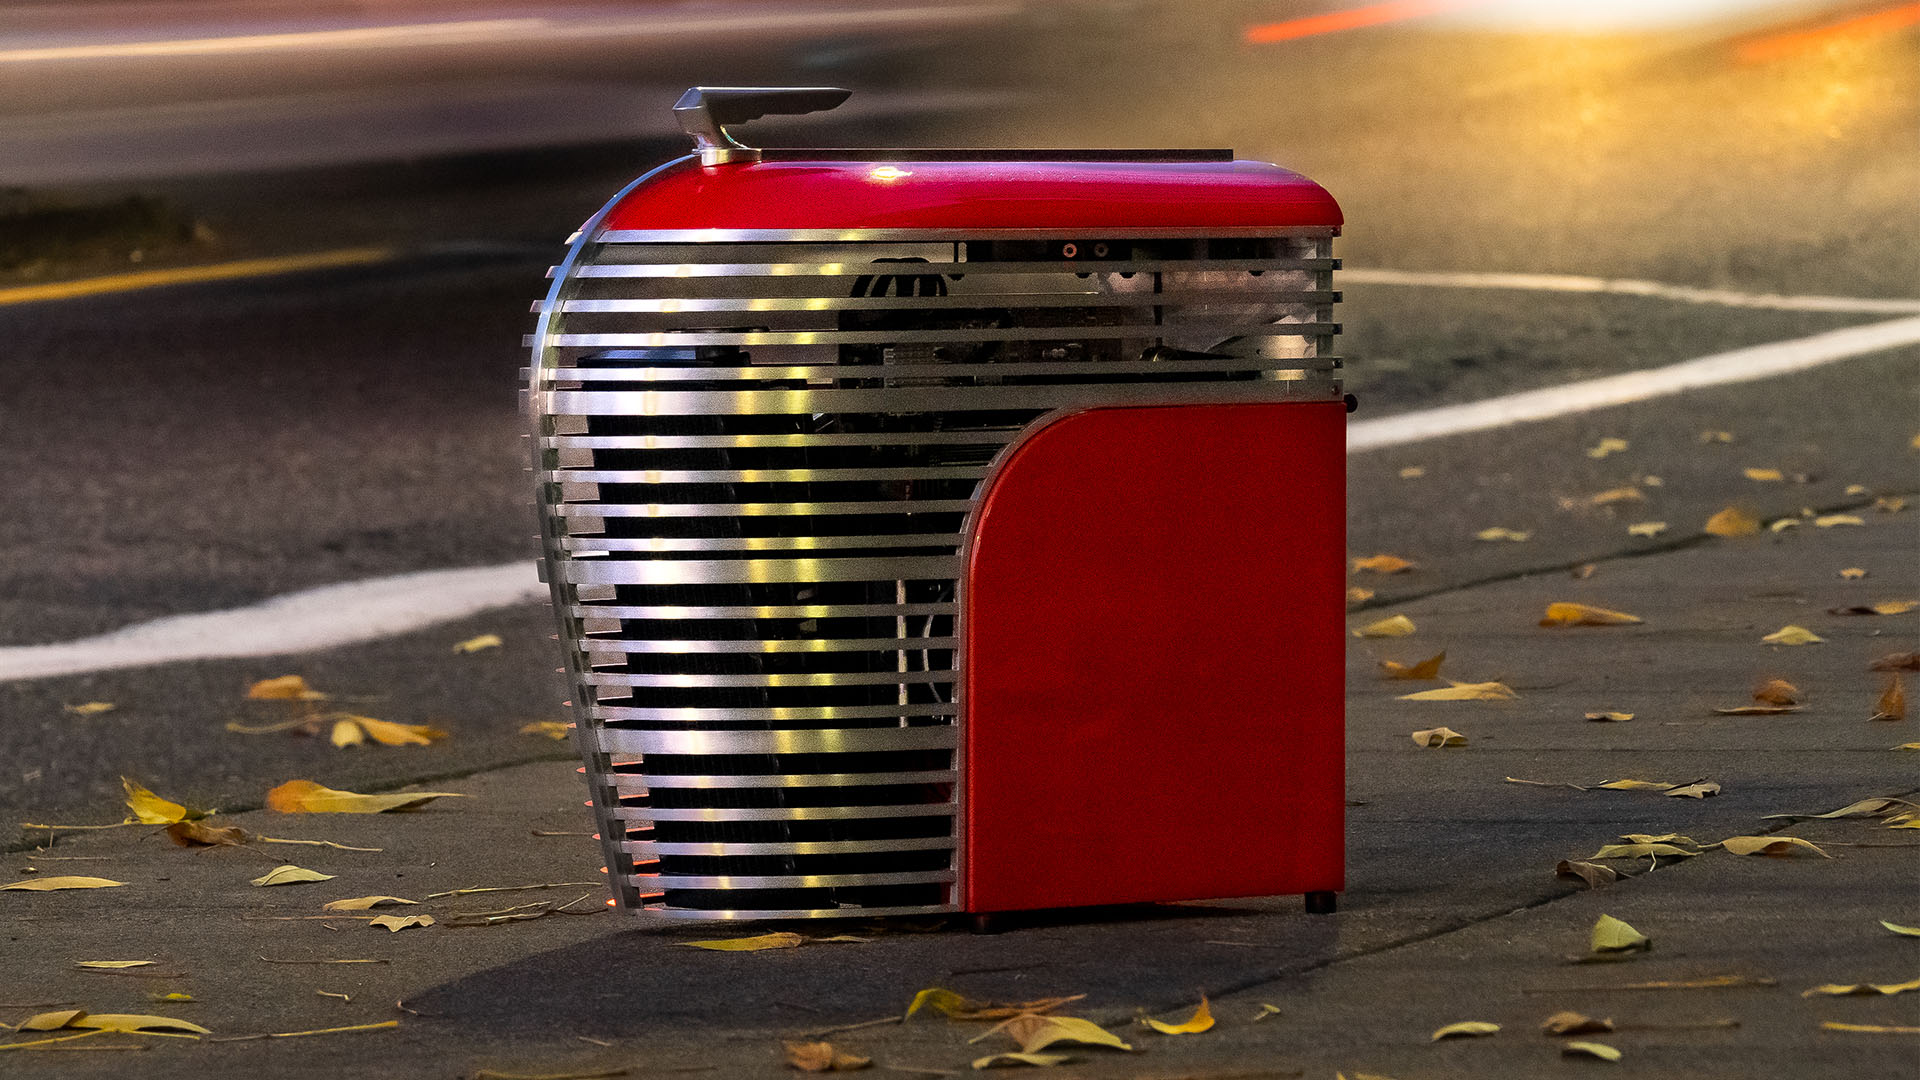 This art deco PC looks like the front of a classic car